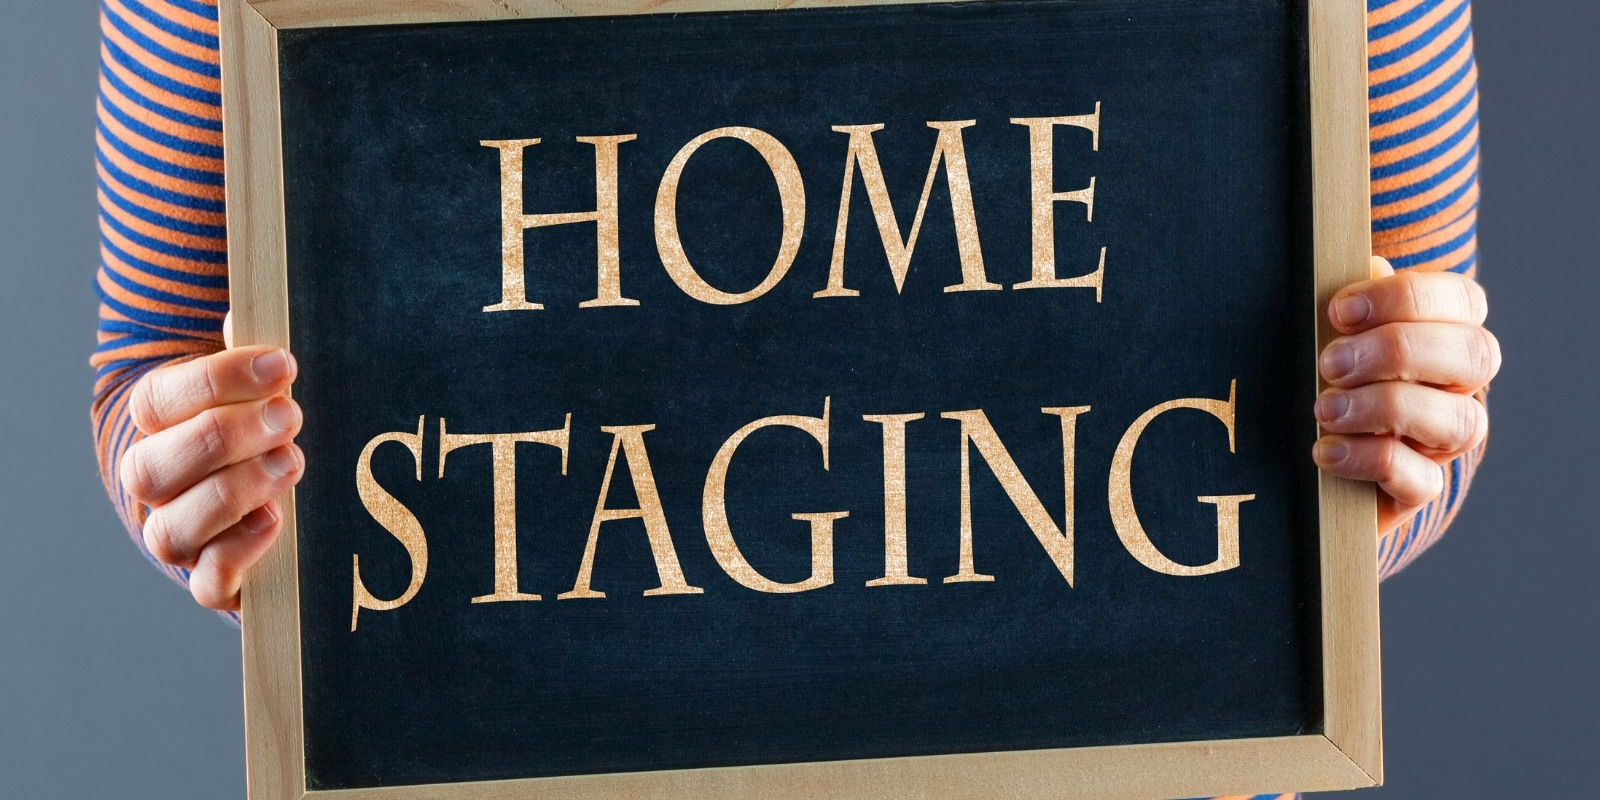 Woman holding a small blackboard that has the words "Home Staging" on it